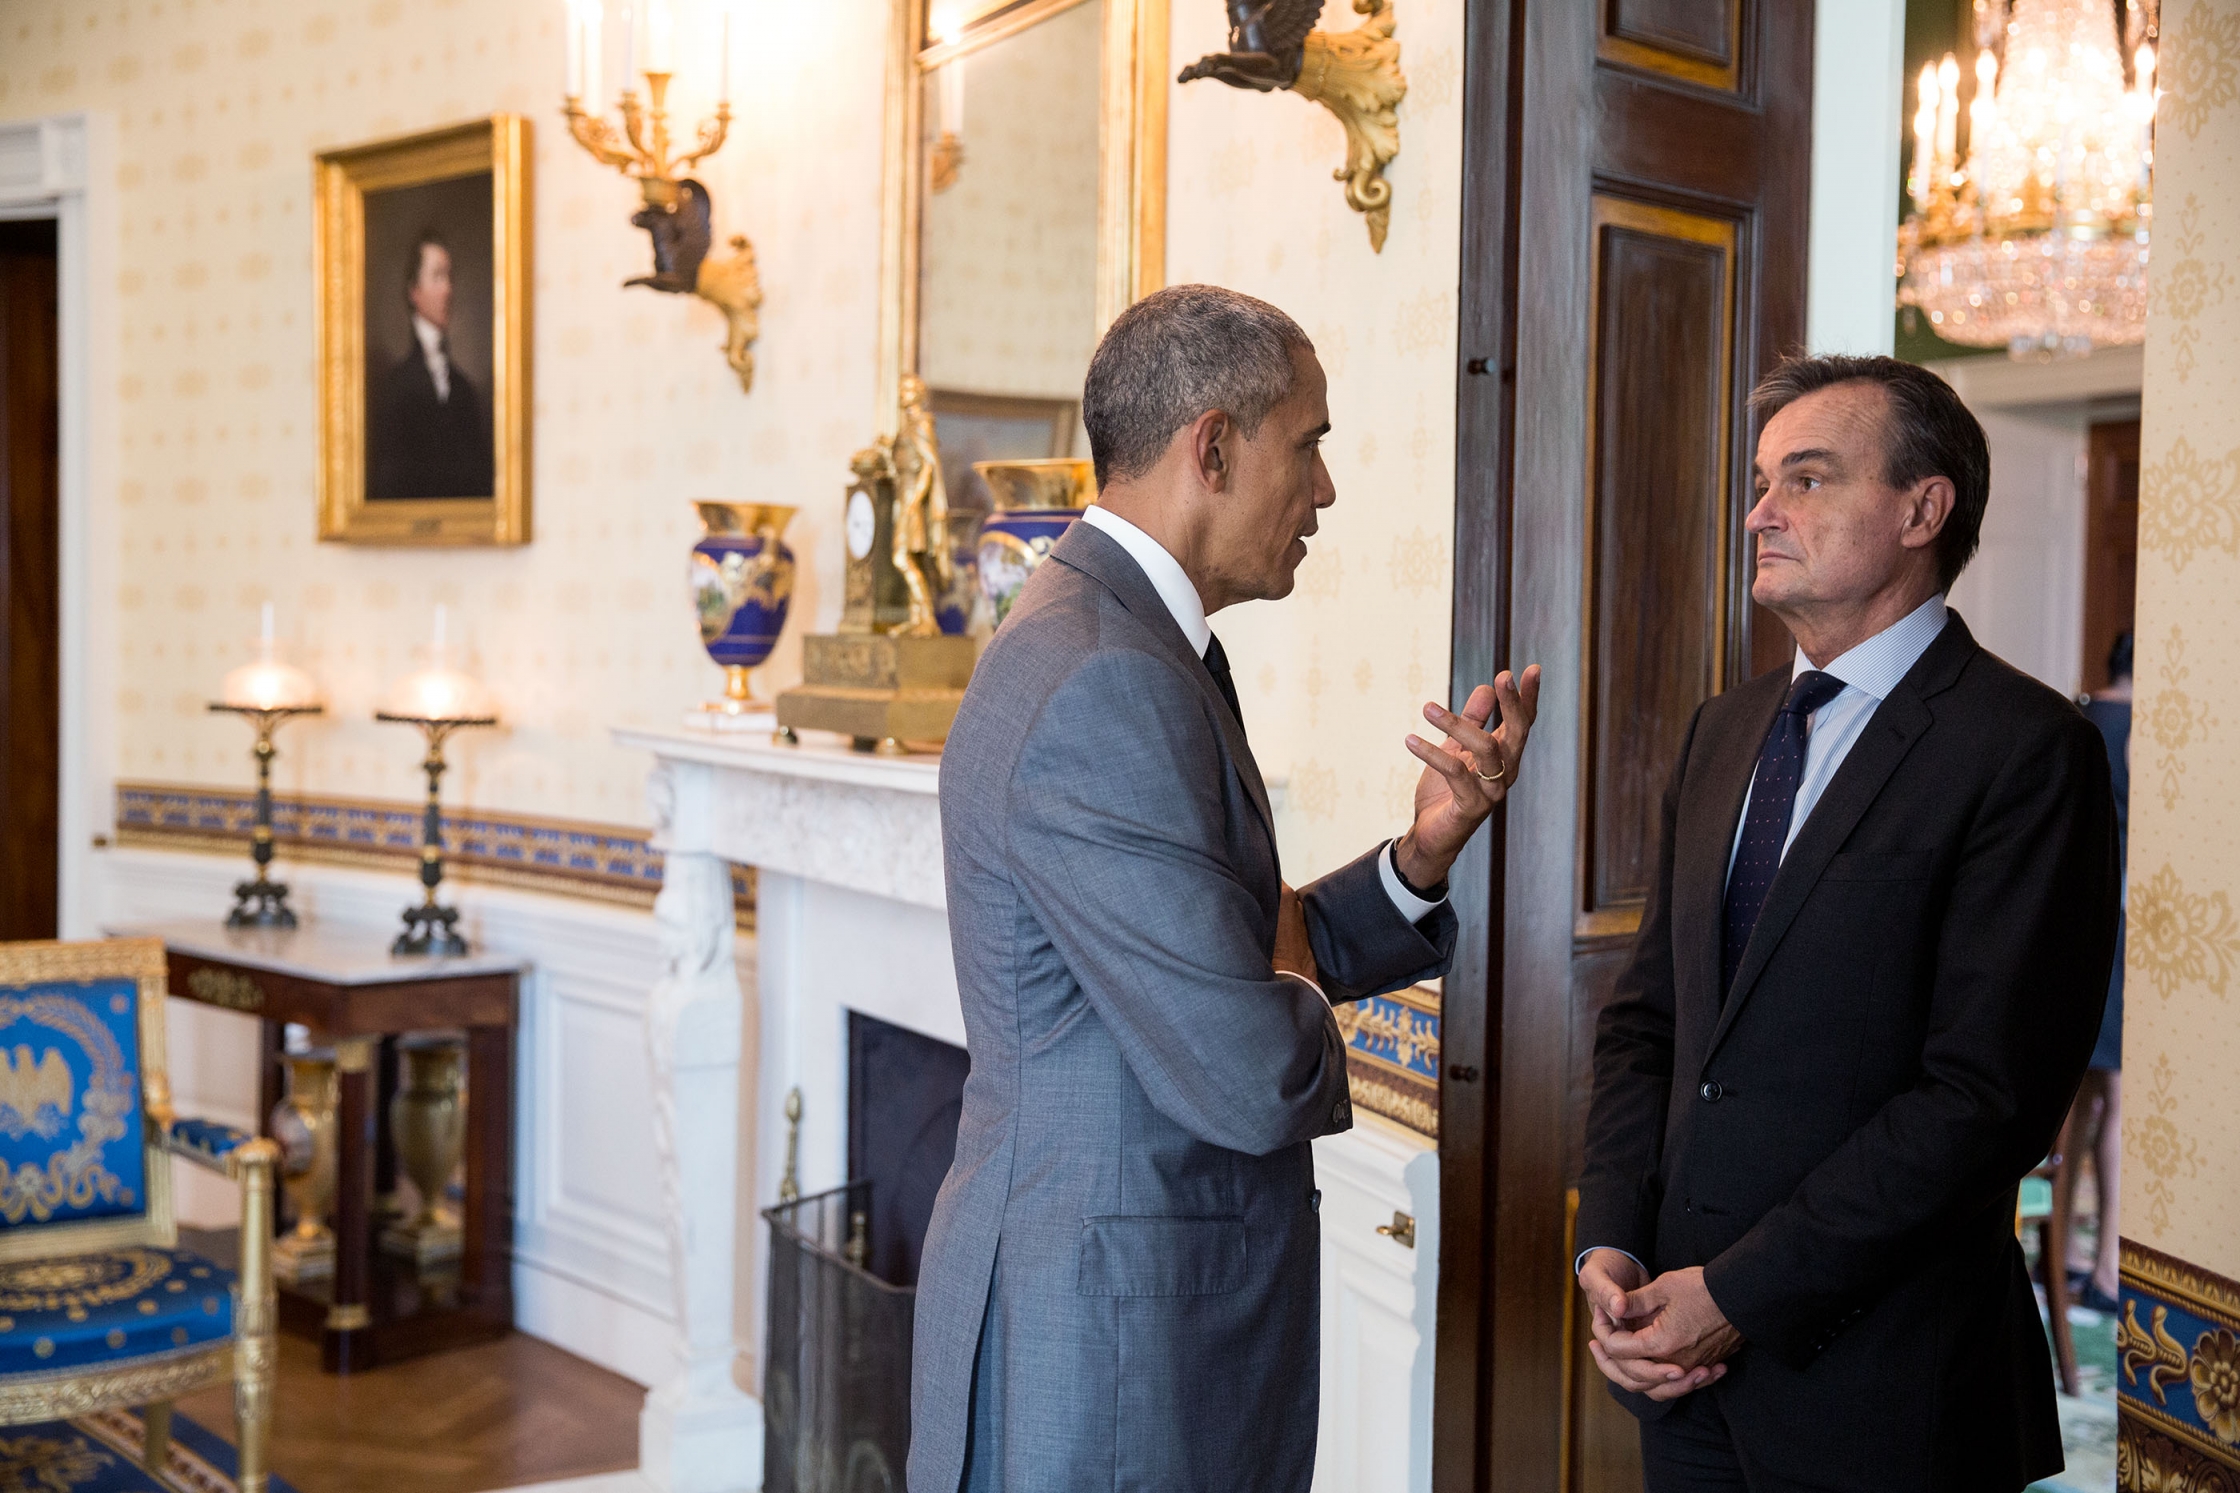 President Barack Obama talks with Ambassador of France to the United States Gérard Araud in the Blue Room of the White House prior to the Diplomatic Corps Reception, July 15, 2016.